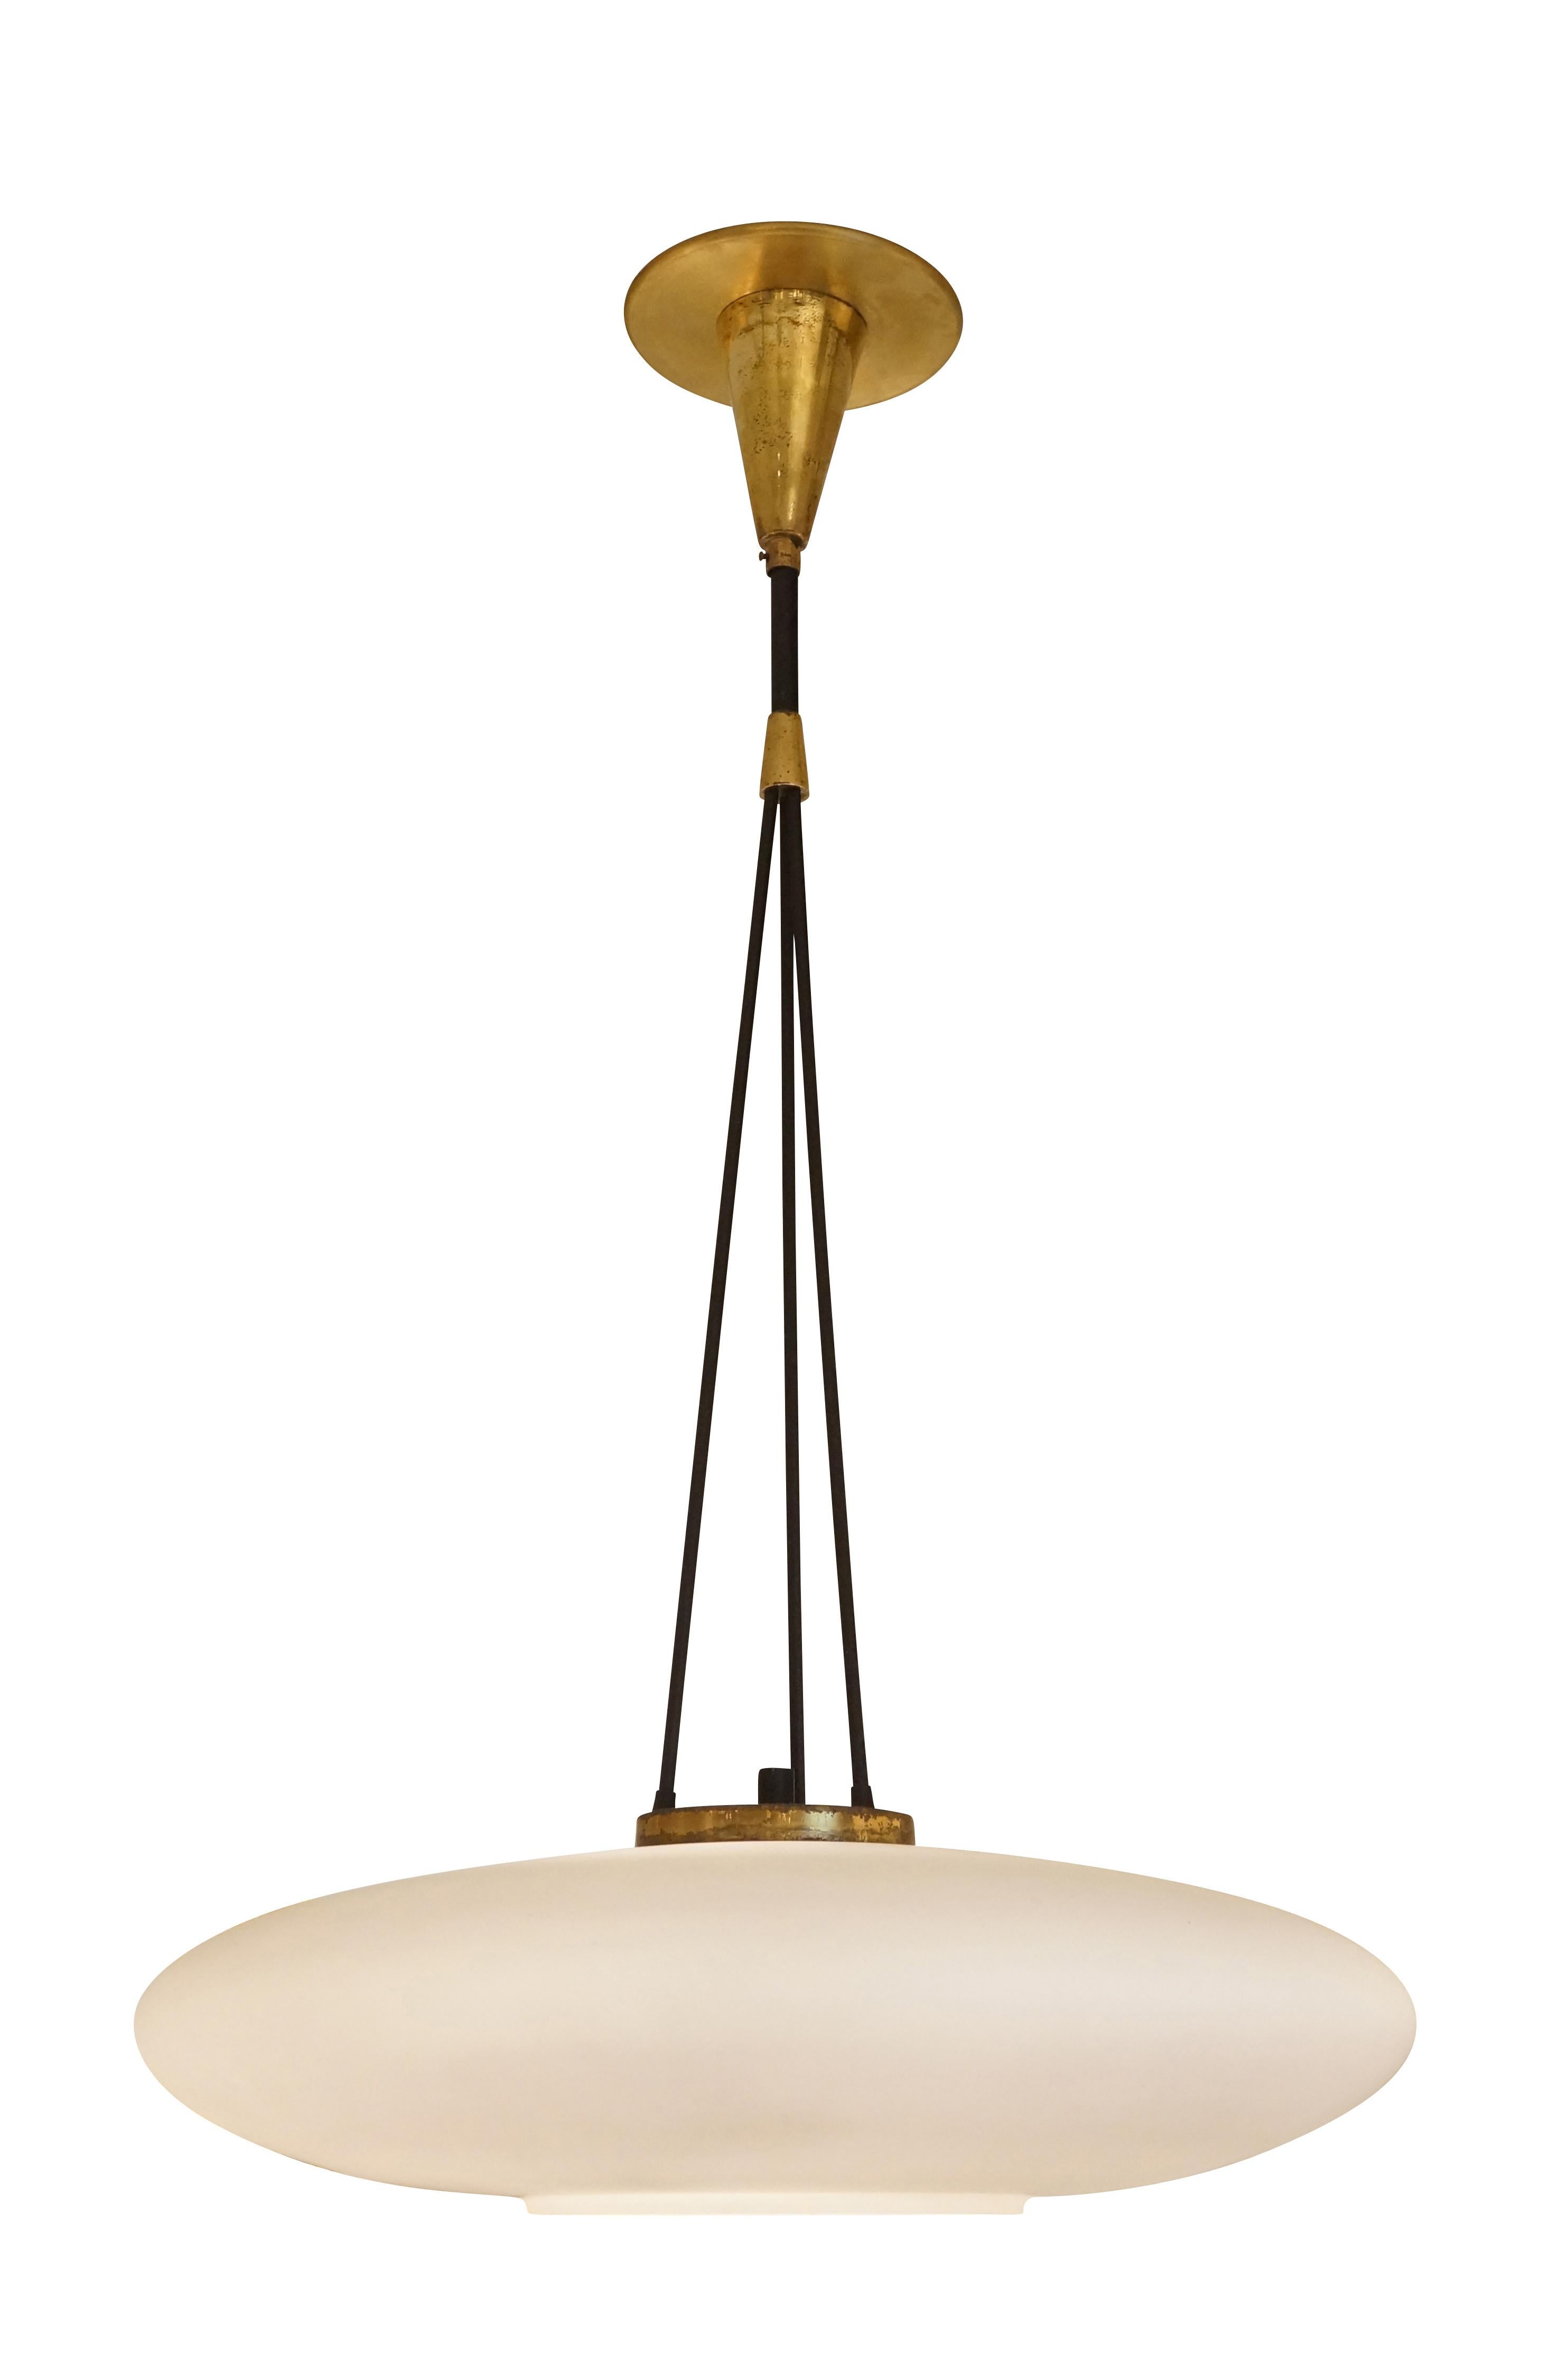 1960s Stilnovo pendant with an elliptical frosted glass shade. The three stems on top converge in a large main stem. Holds three candelabra sockets. 

Condition: Excellent vintage condition, minor wear consistent with age and use.

Diameter: 18”